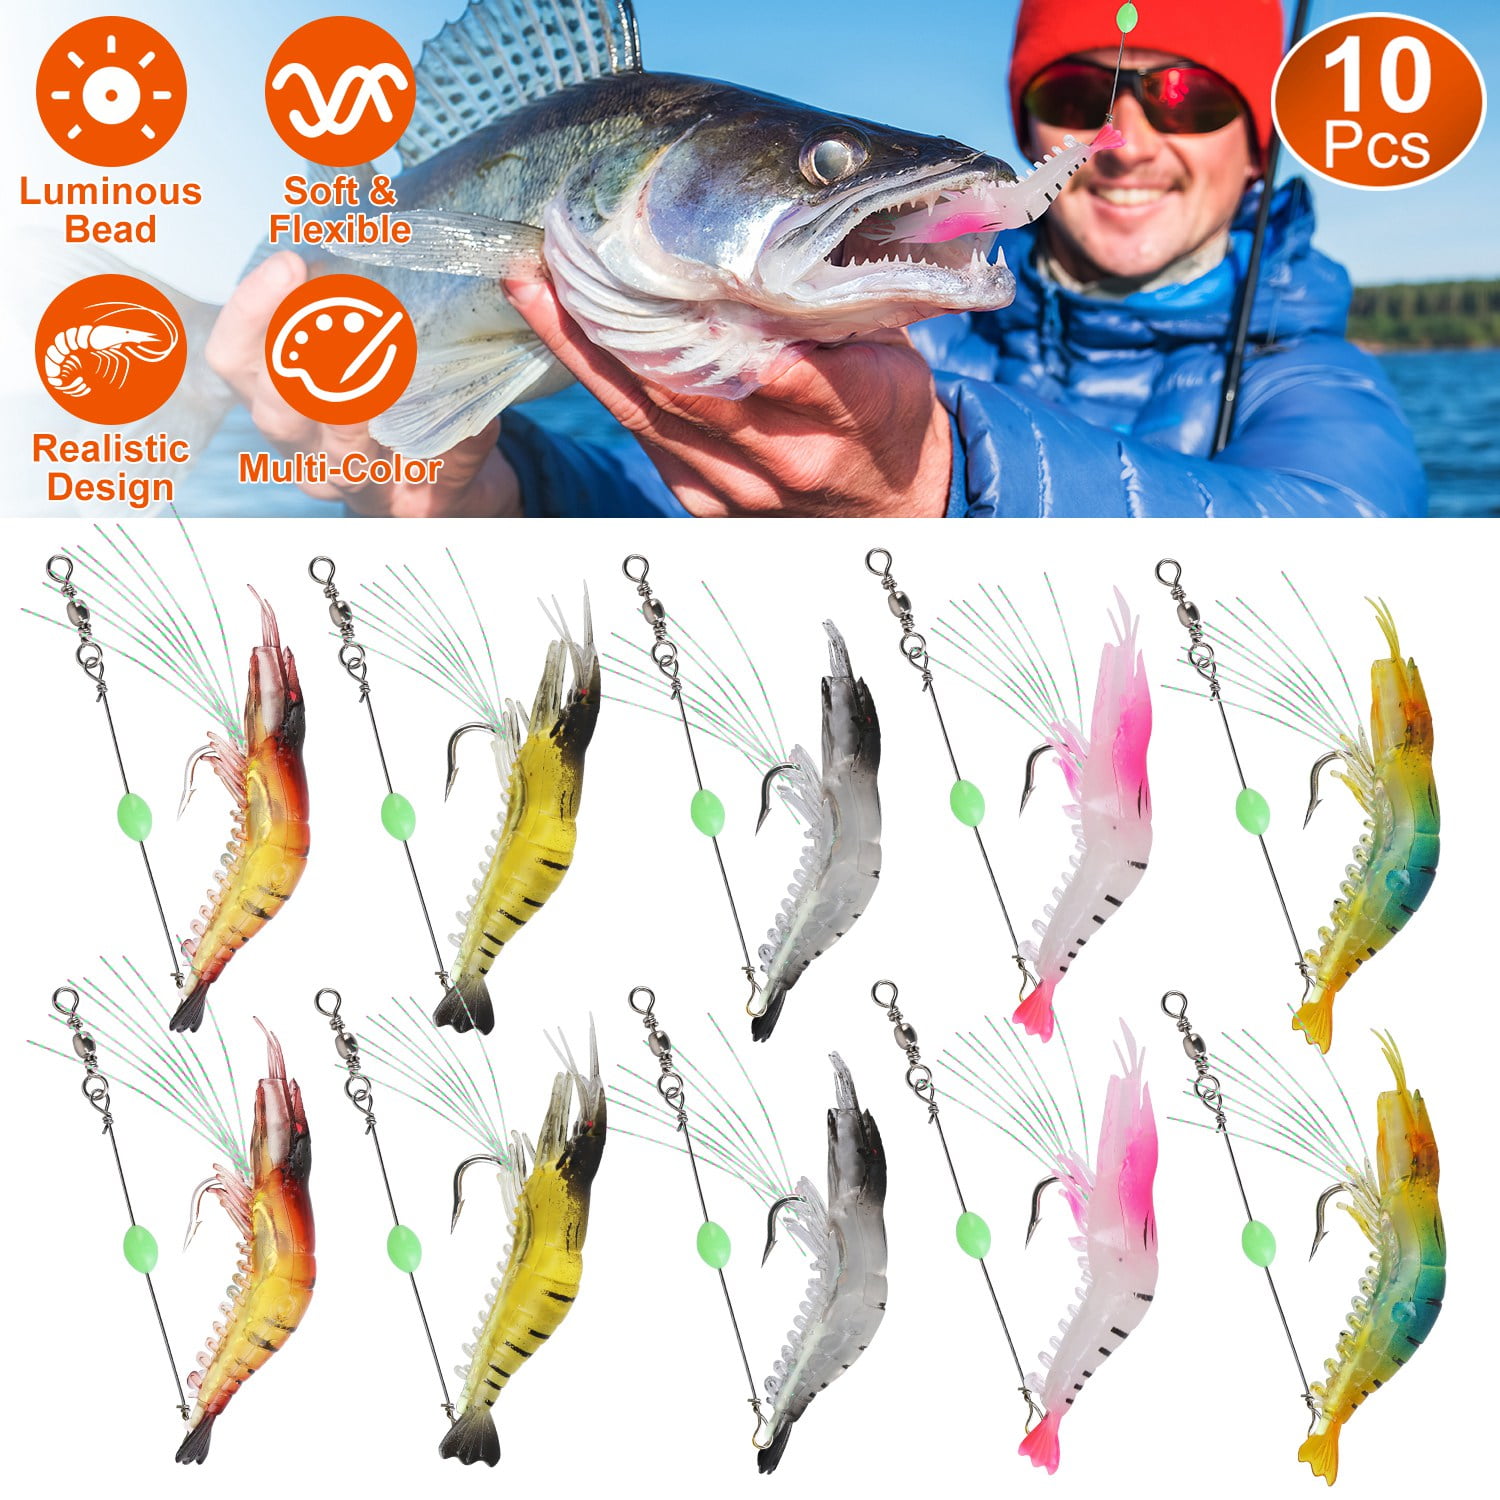 WANBY Fishing Shrimp Lures Artificial Silicone Soft Shrimp Lure